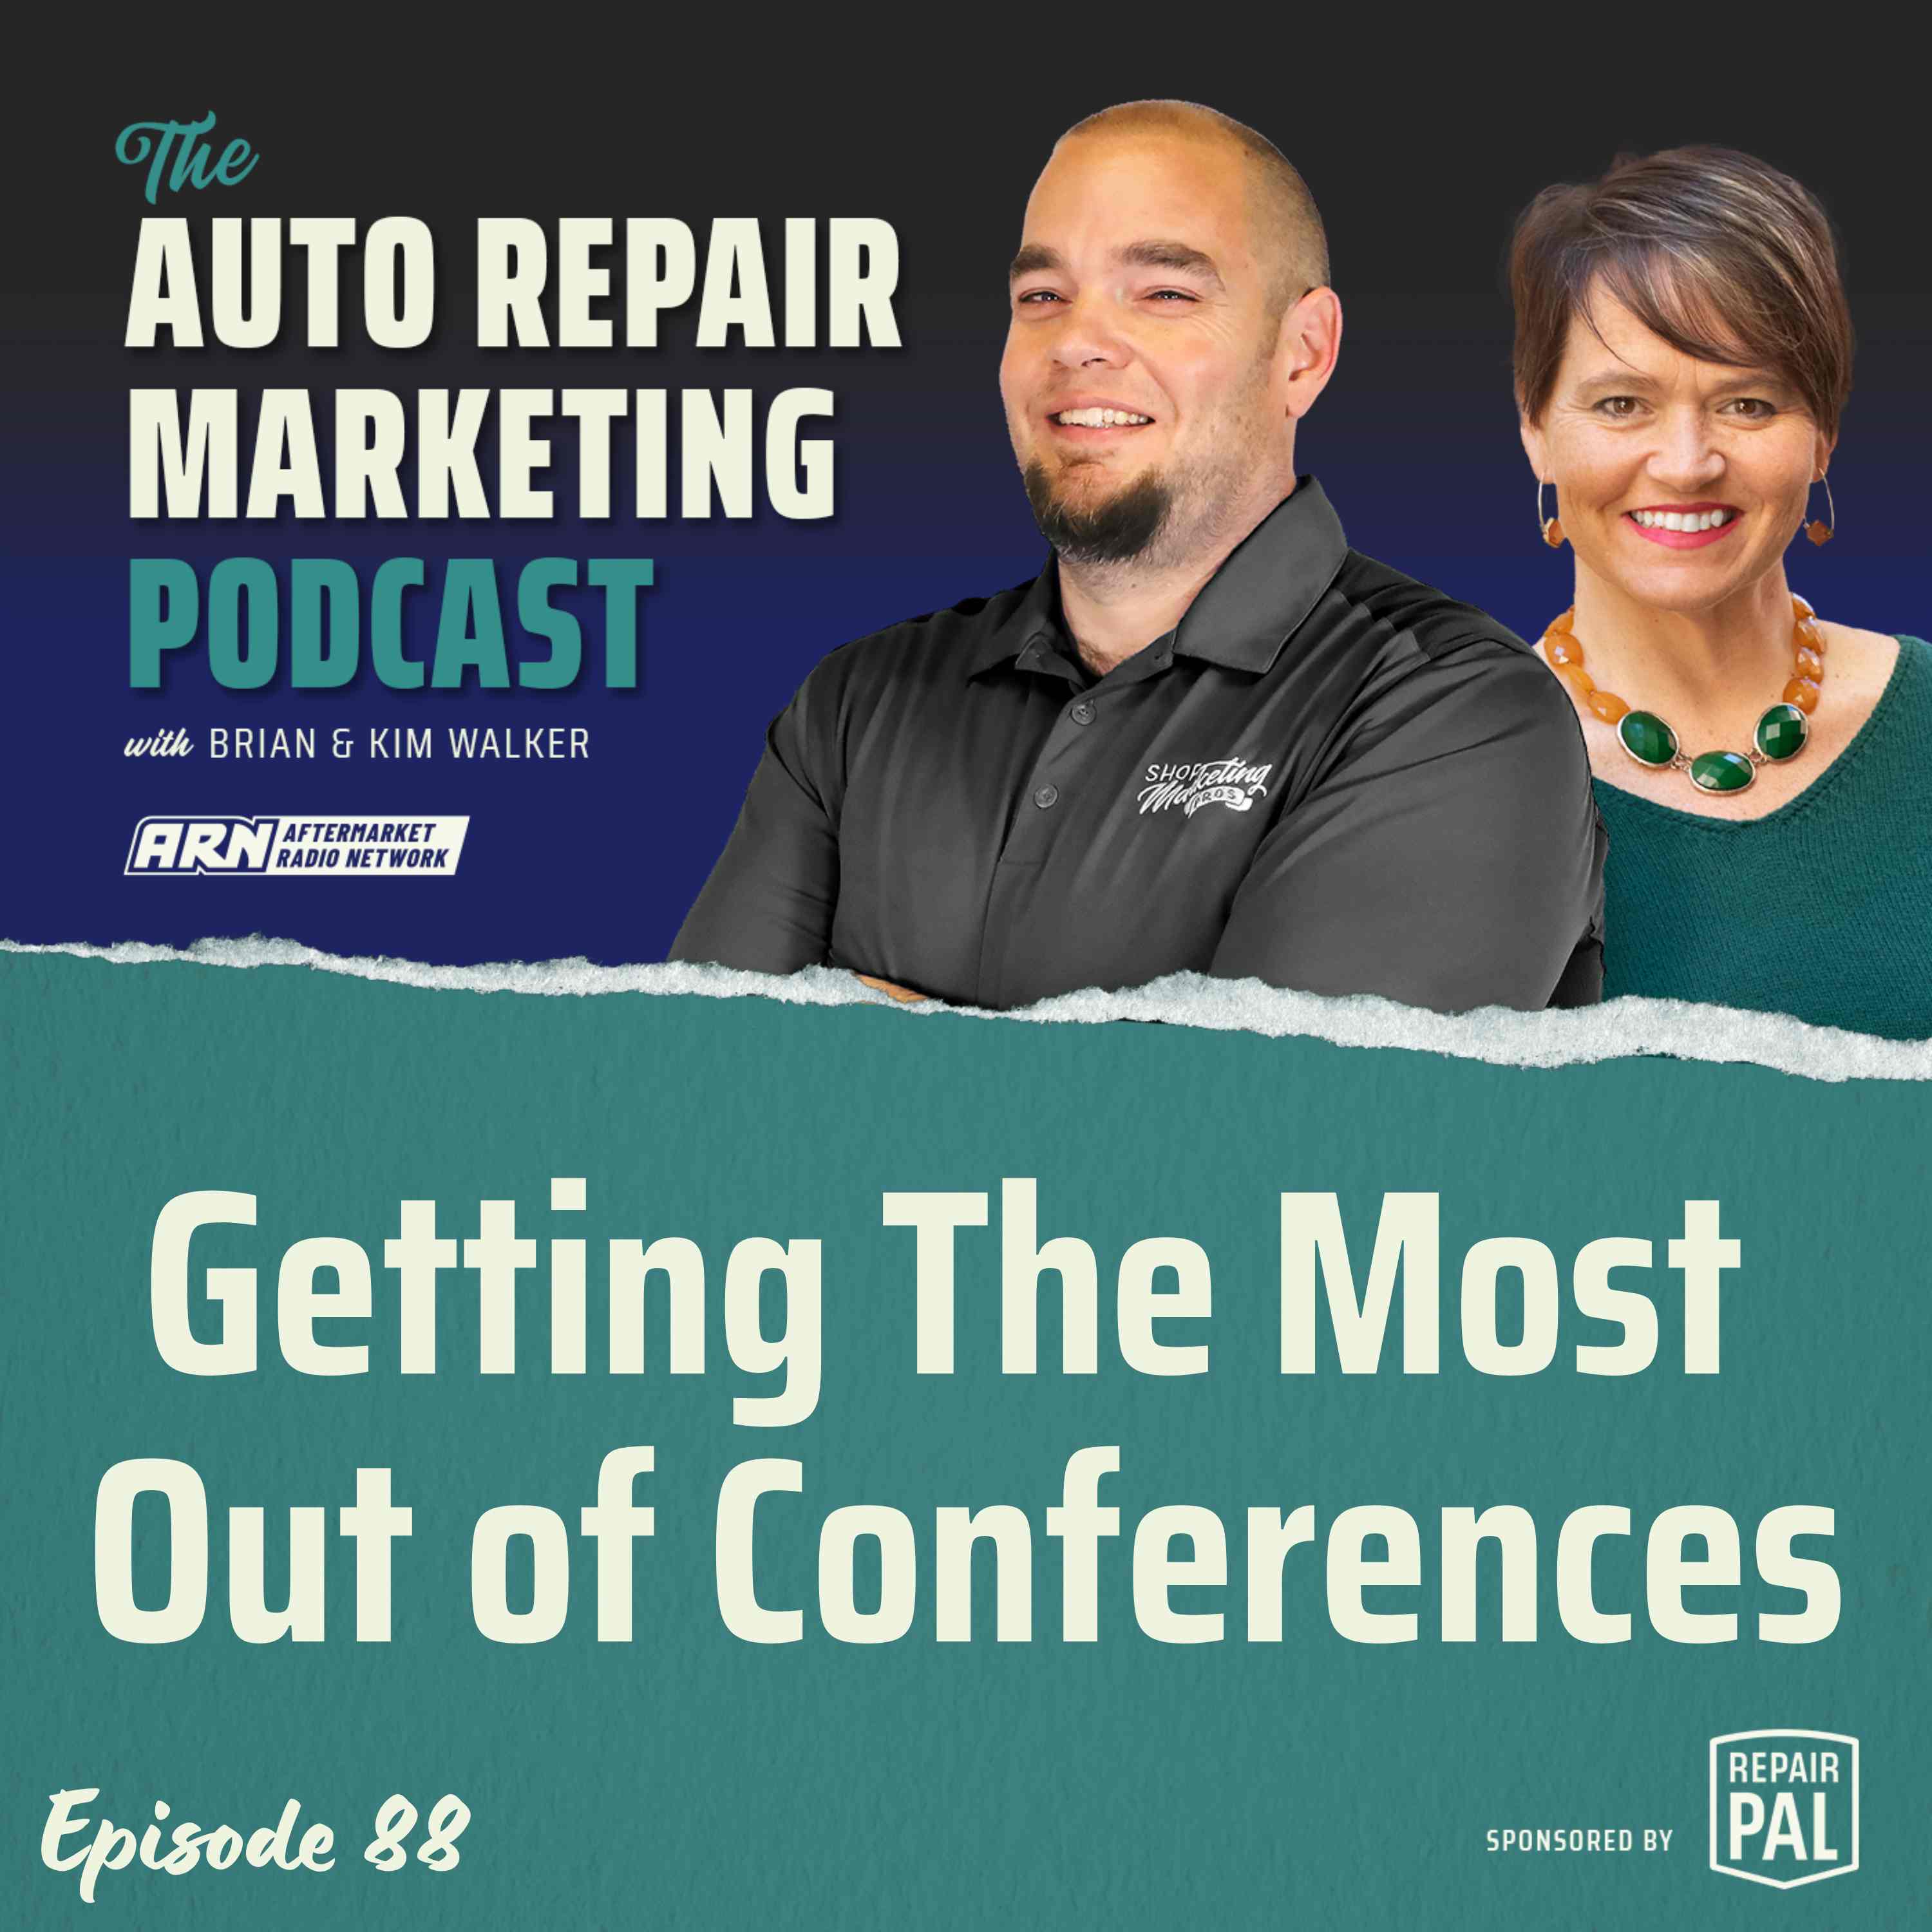 Getting The Most Out of Conferences [E088] - The Auto Repair Marketing Podcast